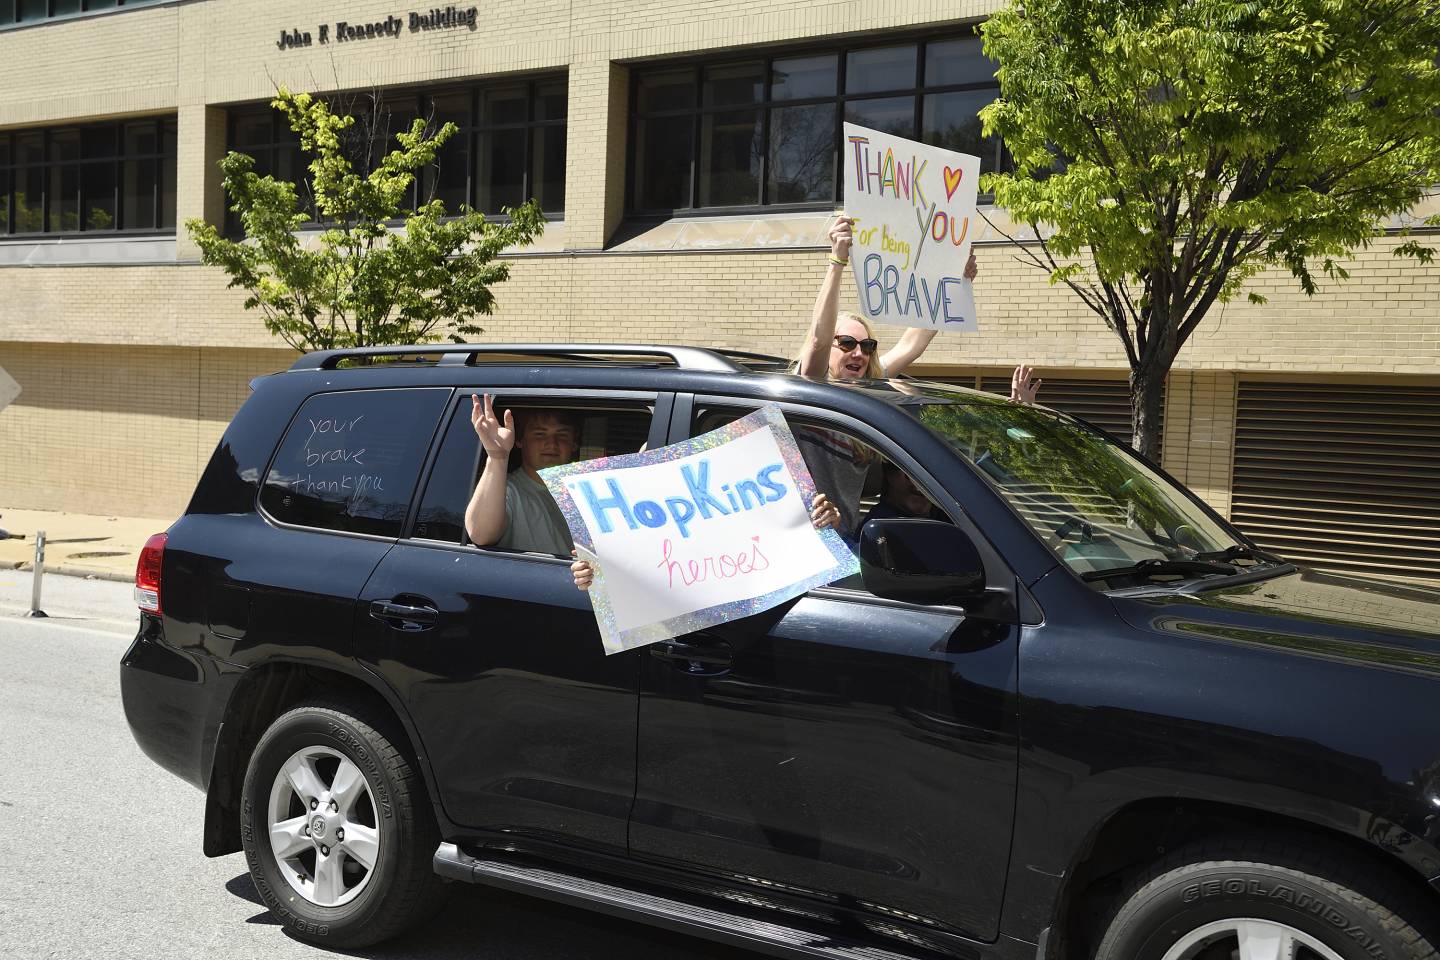 People in a car wave signs thanking health care workers